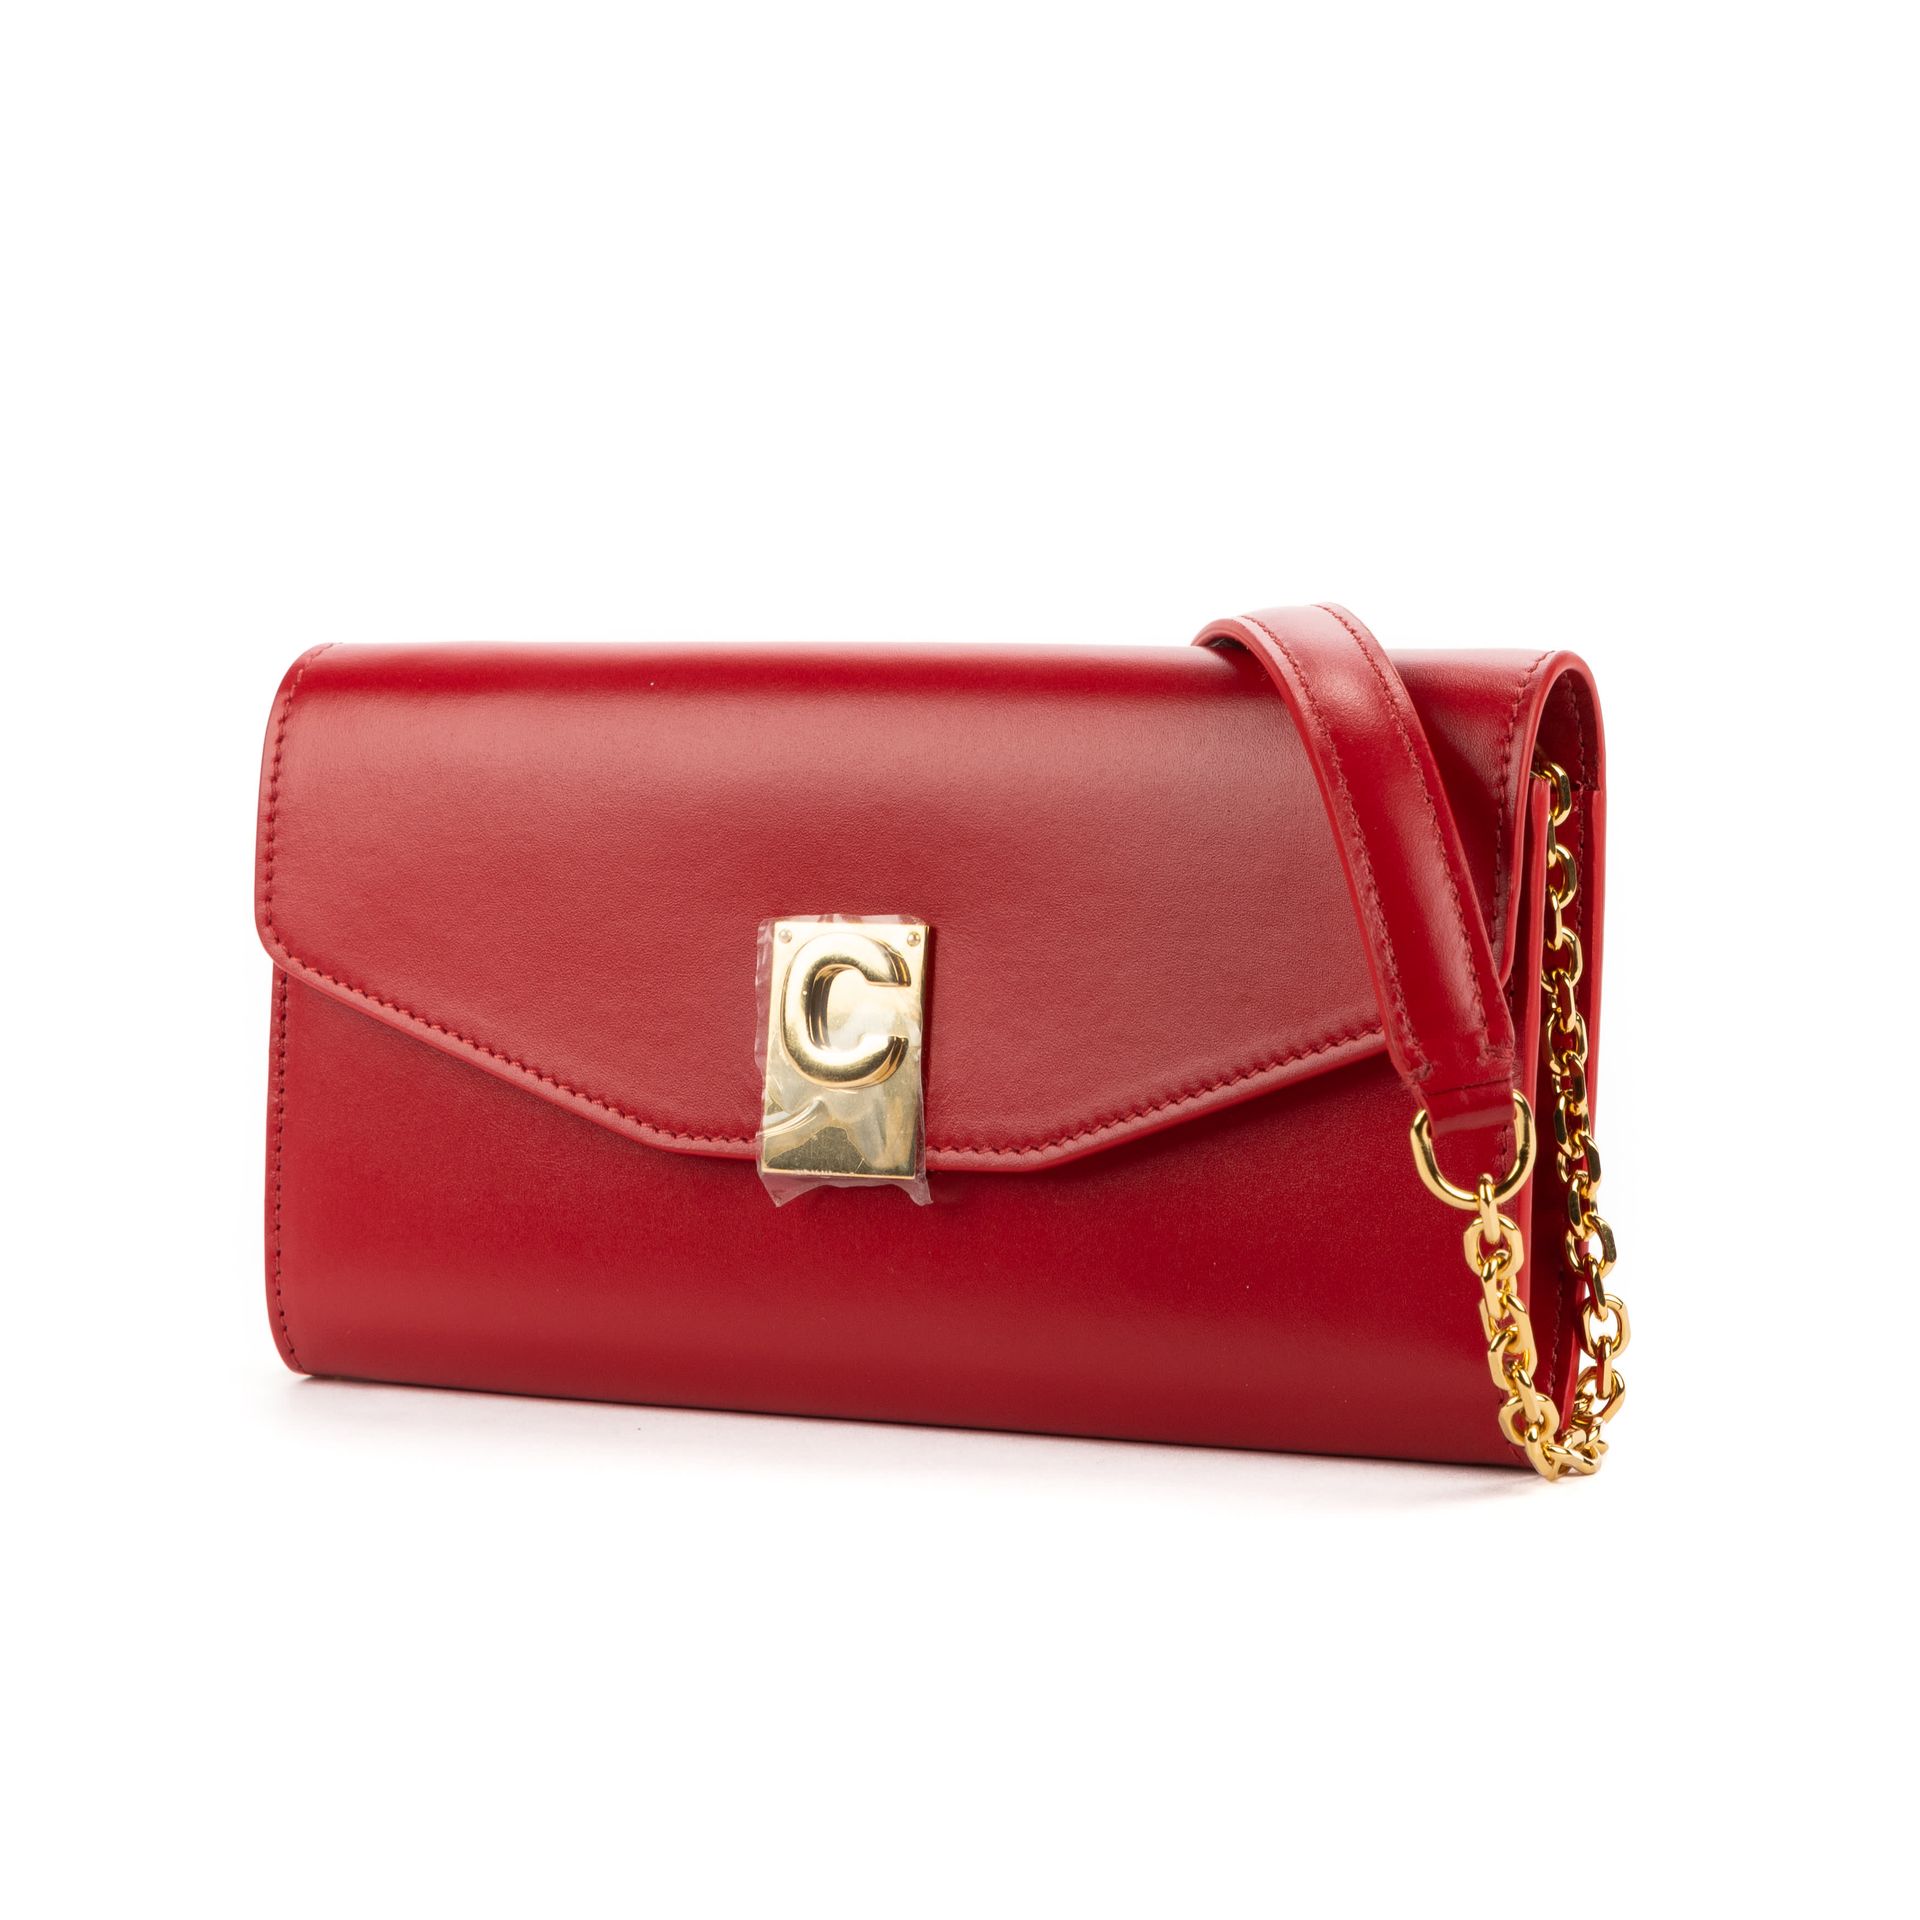 Pre-Loved Celine Clutch in Red Smooth Leather. Gold Bras…